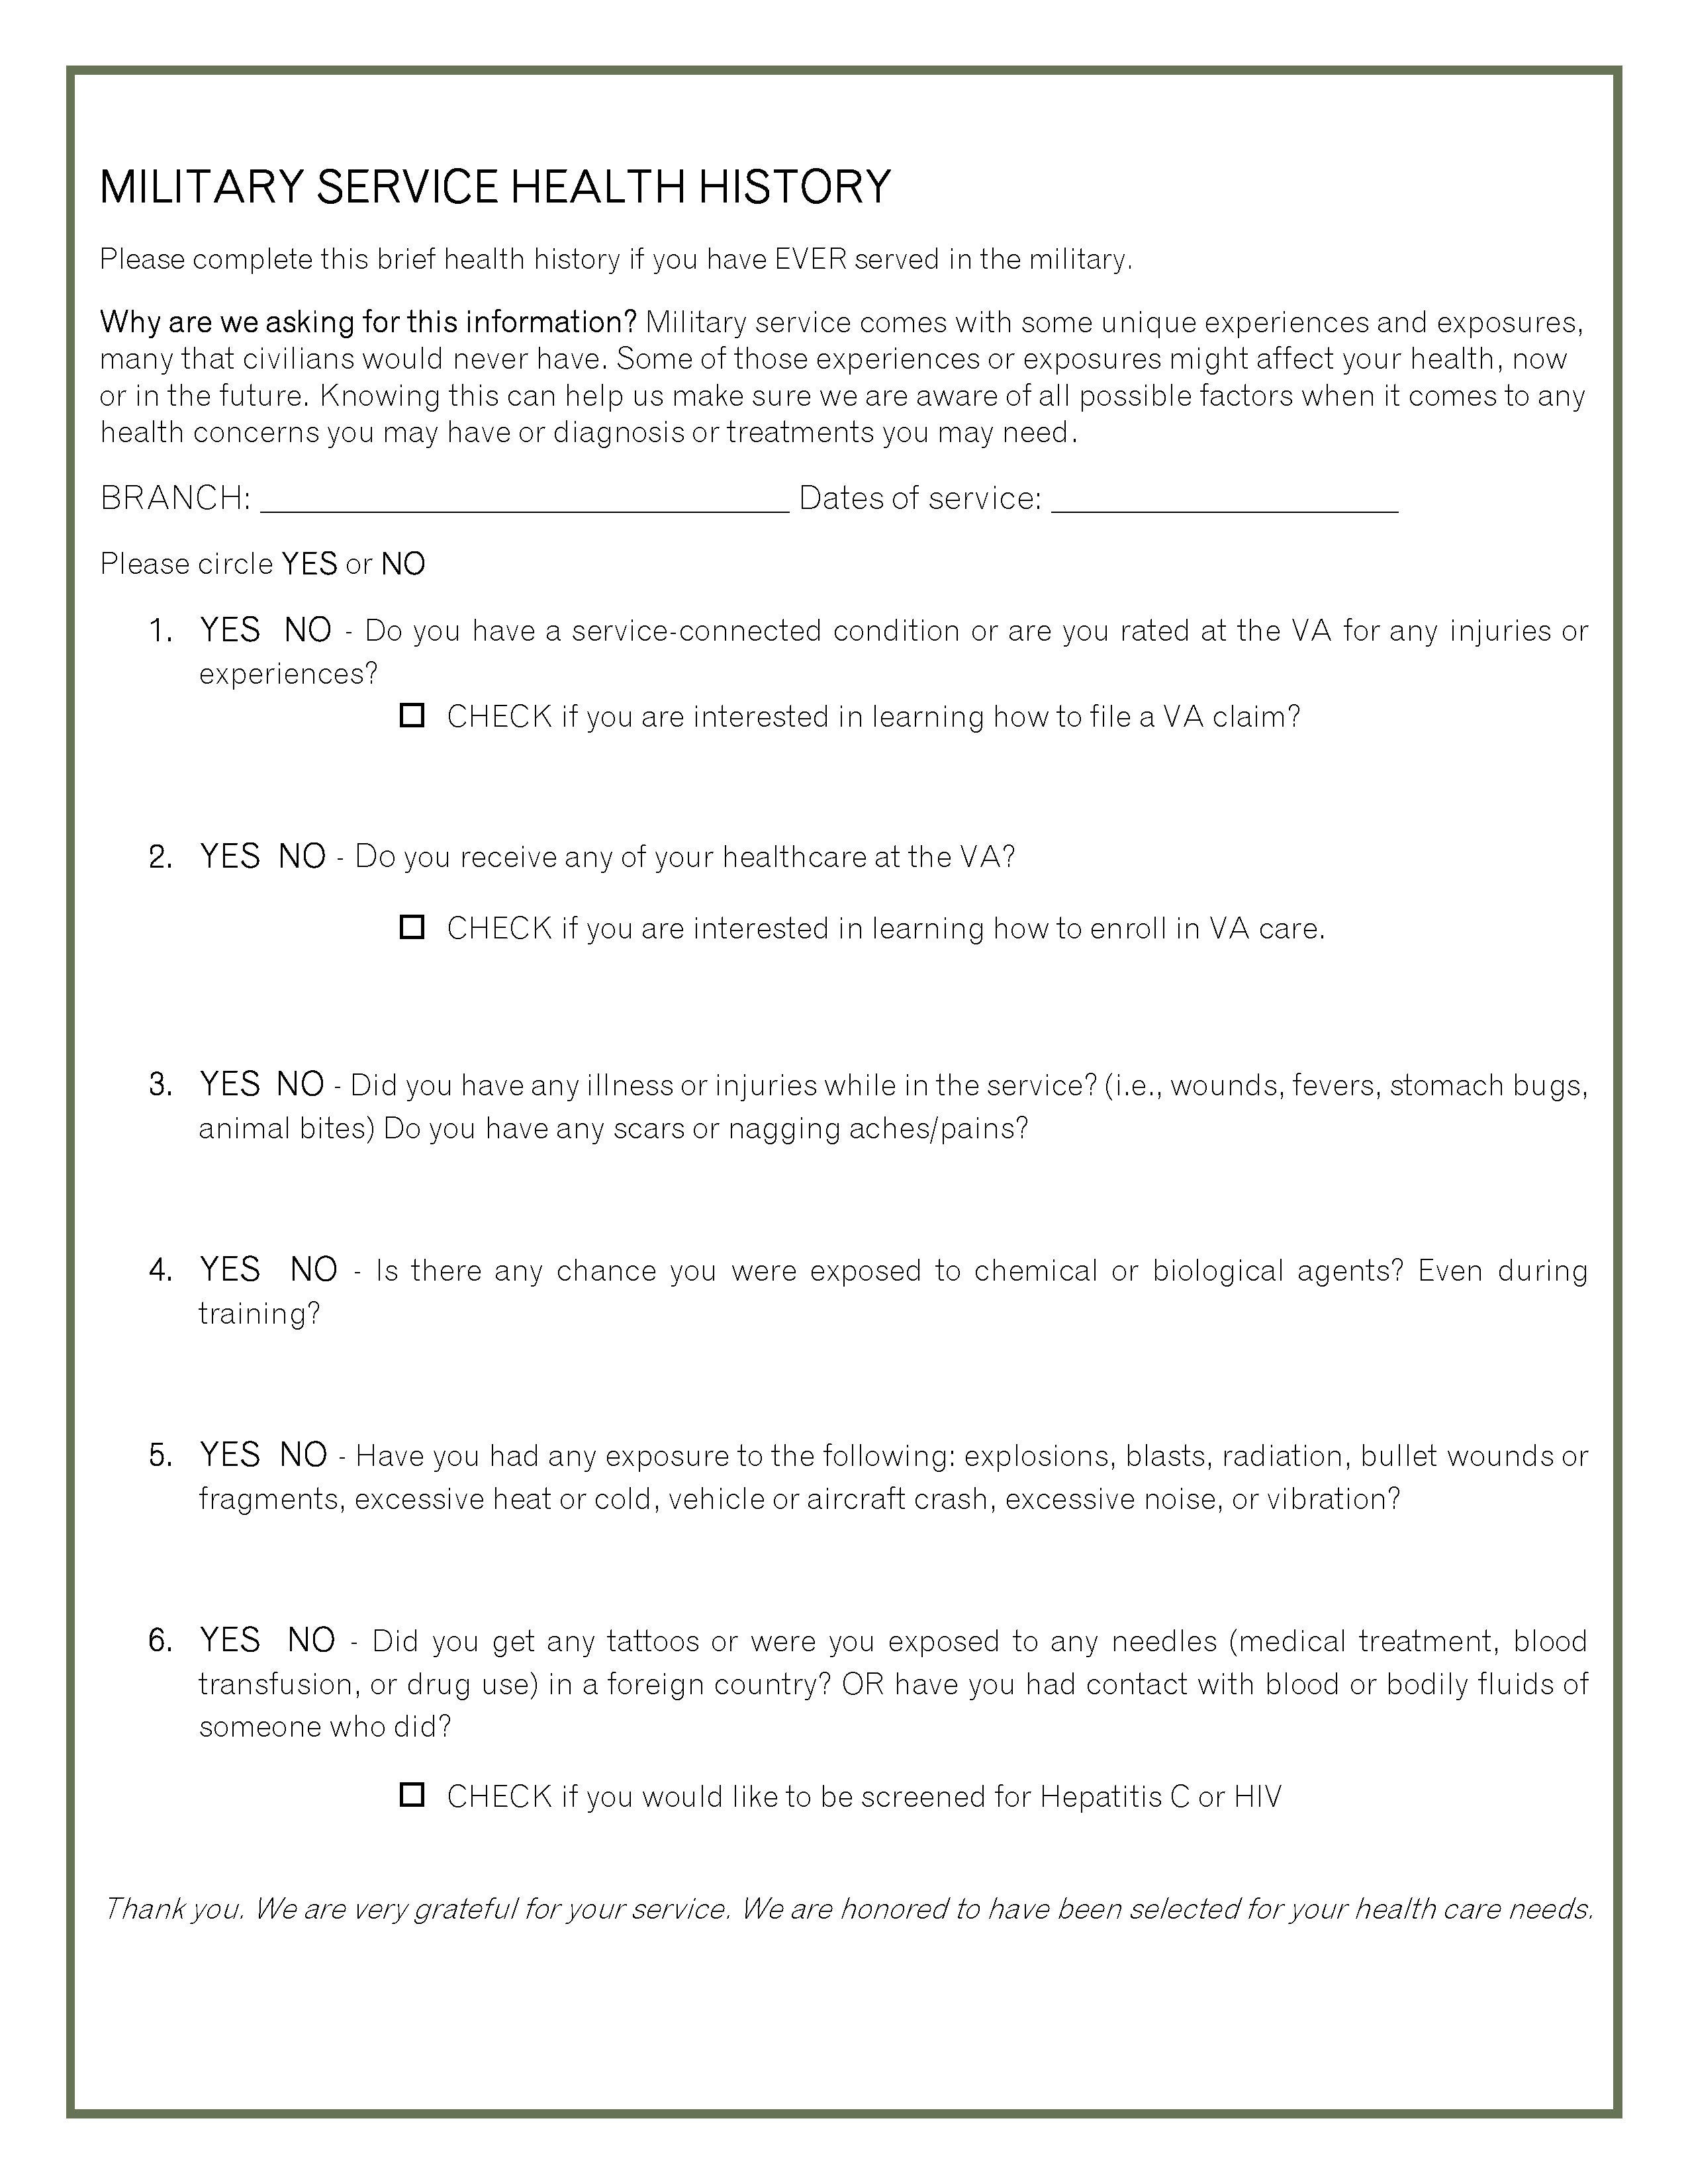 Military Service Health History Questionnaire 